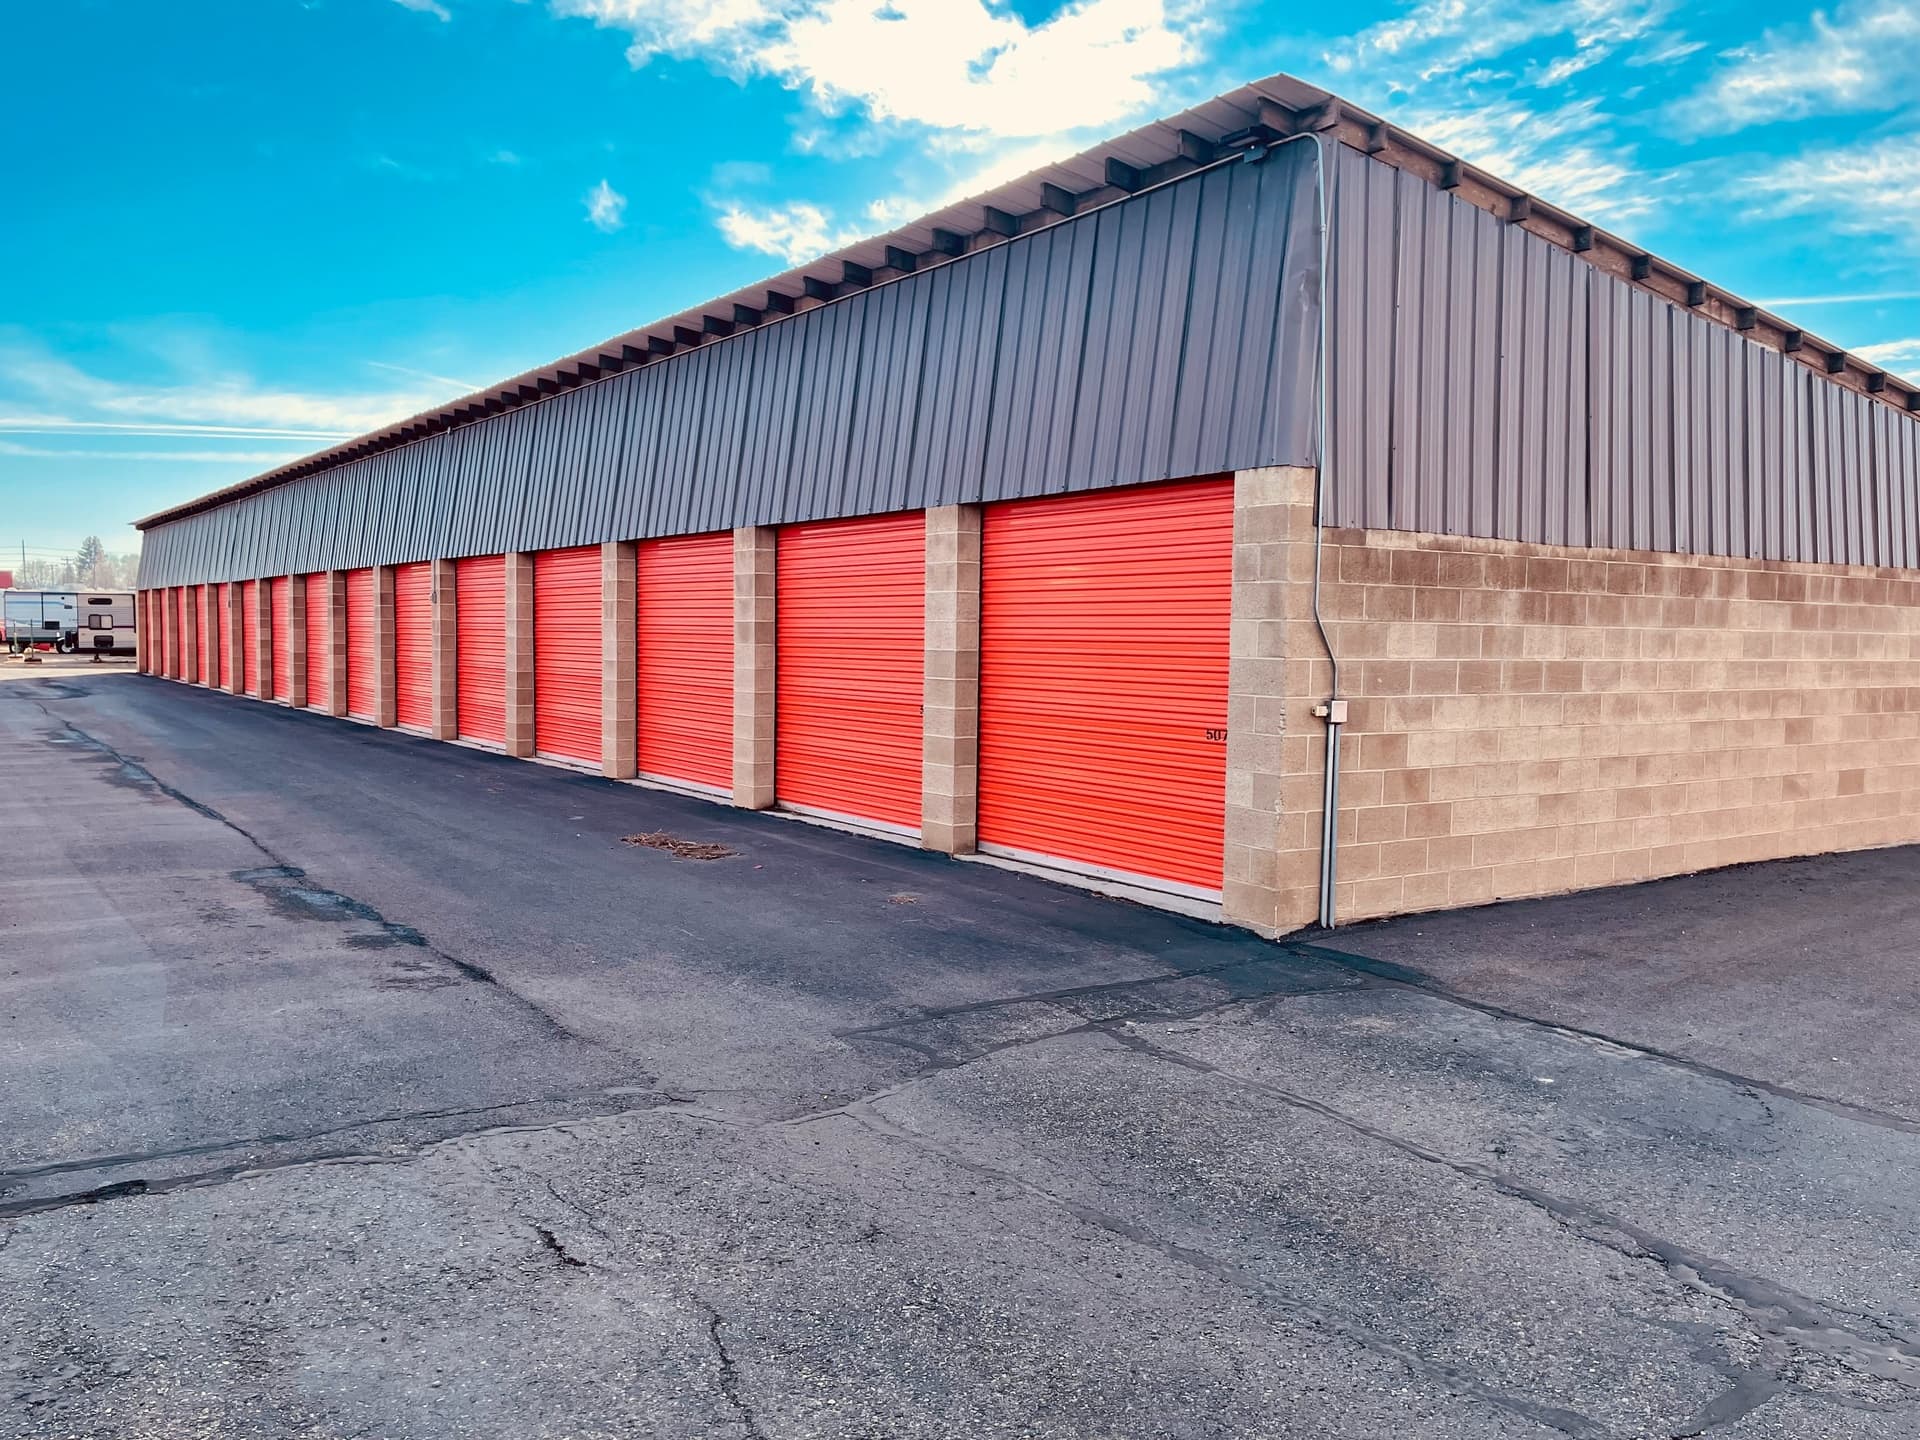 Self-Storage Facilities Class Action